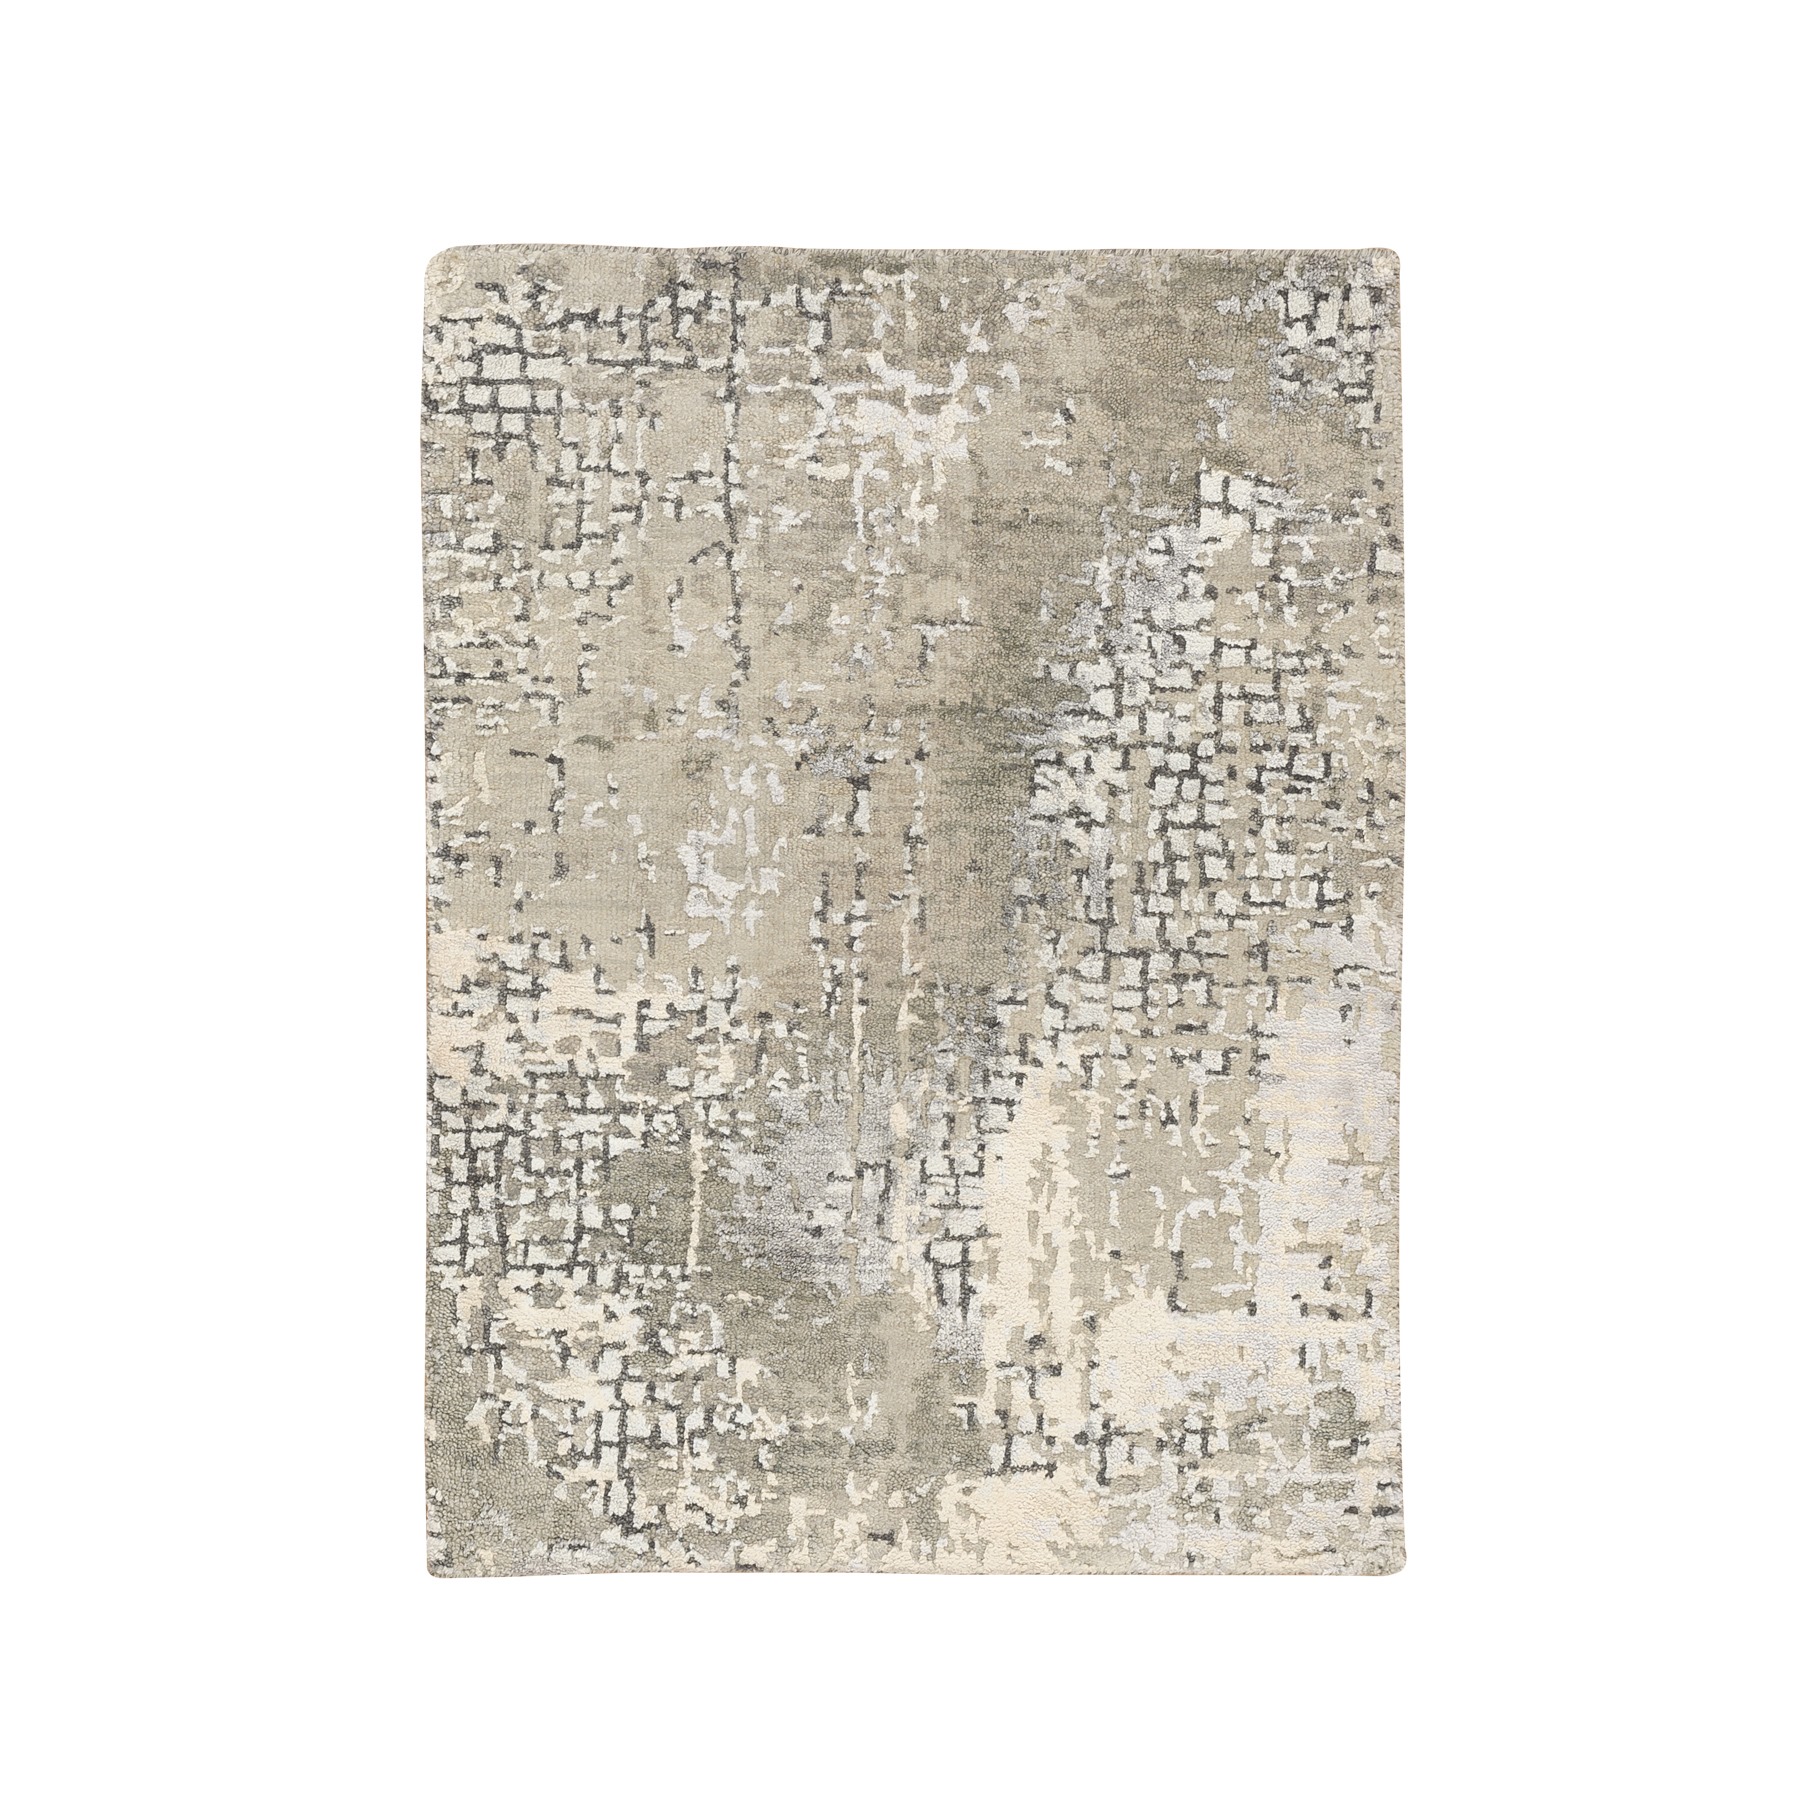 2'x2'10" Taupe Wool and Silk Abstract with Mosaic Design Hand Woven Mat Persian Knot Oriental Rug 